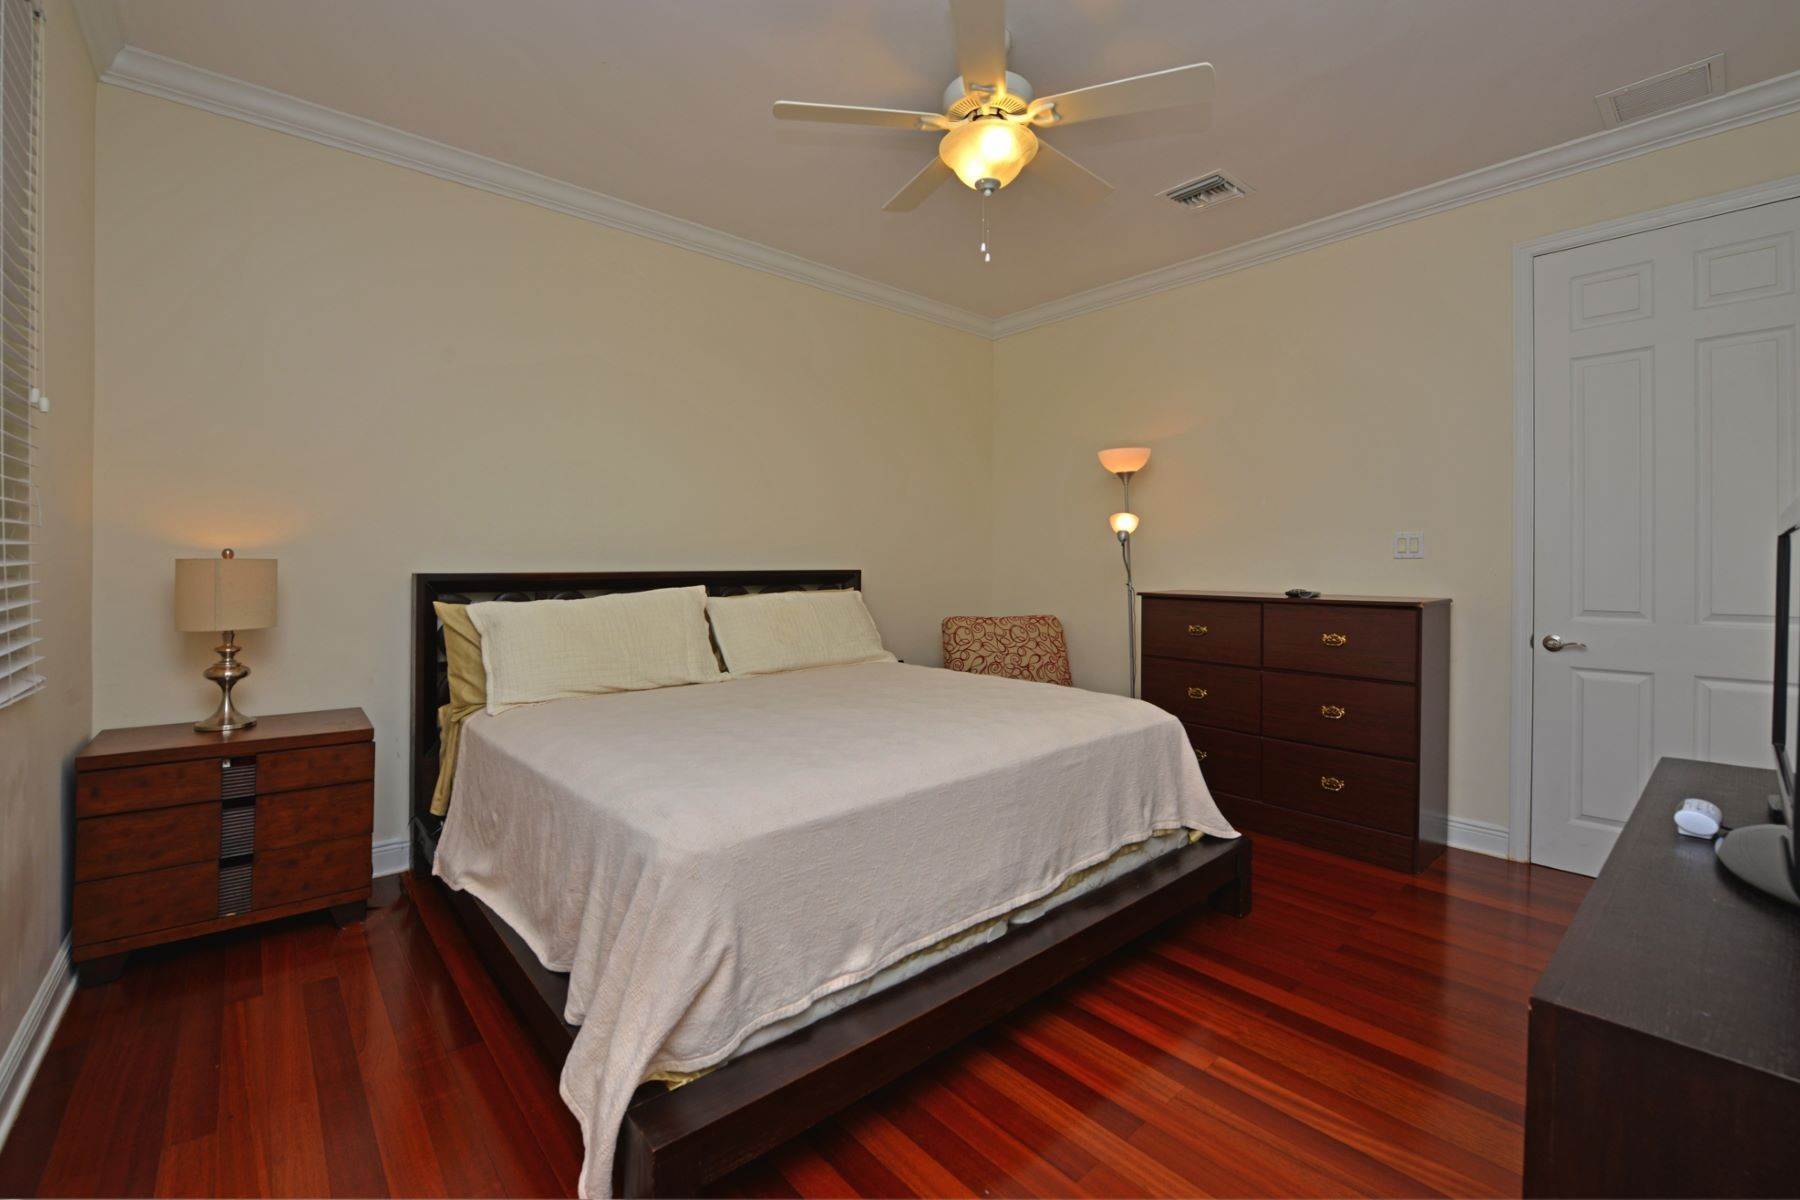 9. Townhouse for Sale at Balmoral GR79 Other Bahamas, Other Areas In The Bahamas, Bahamas